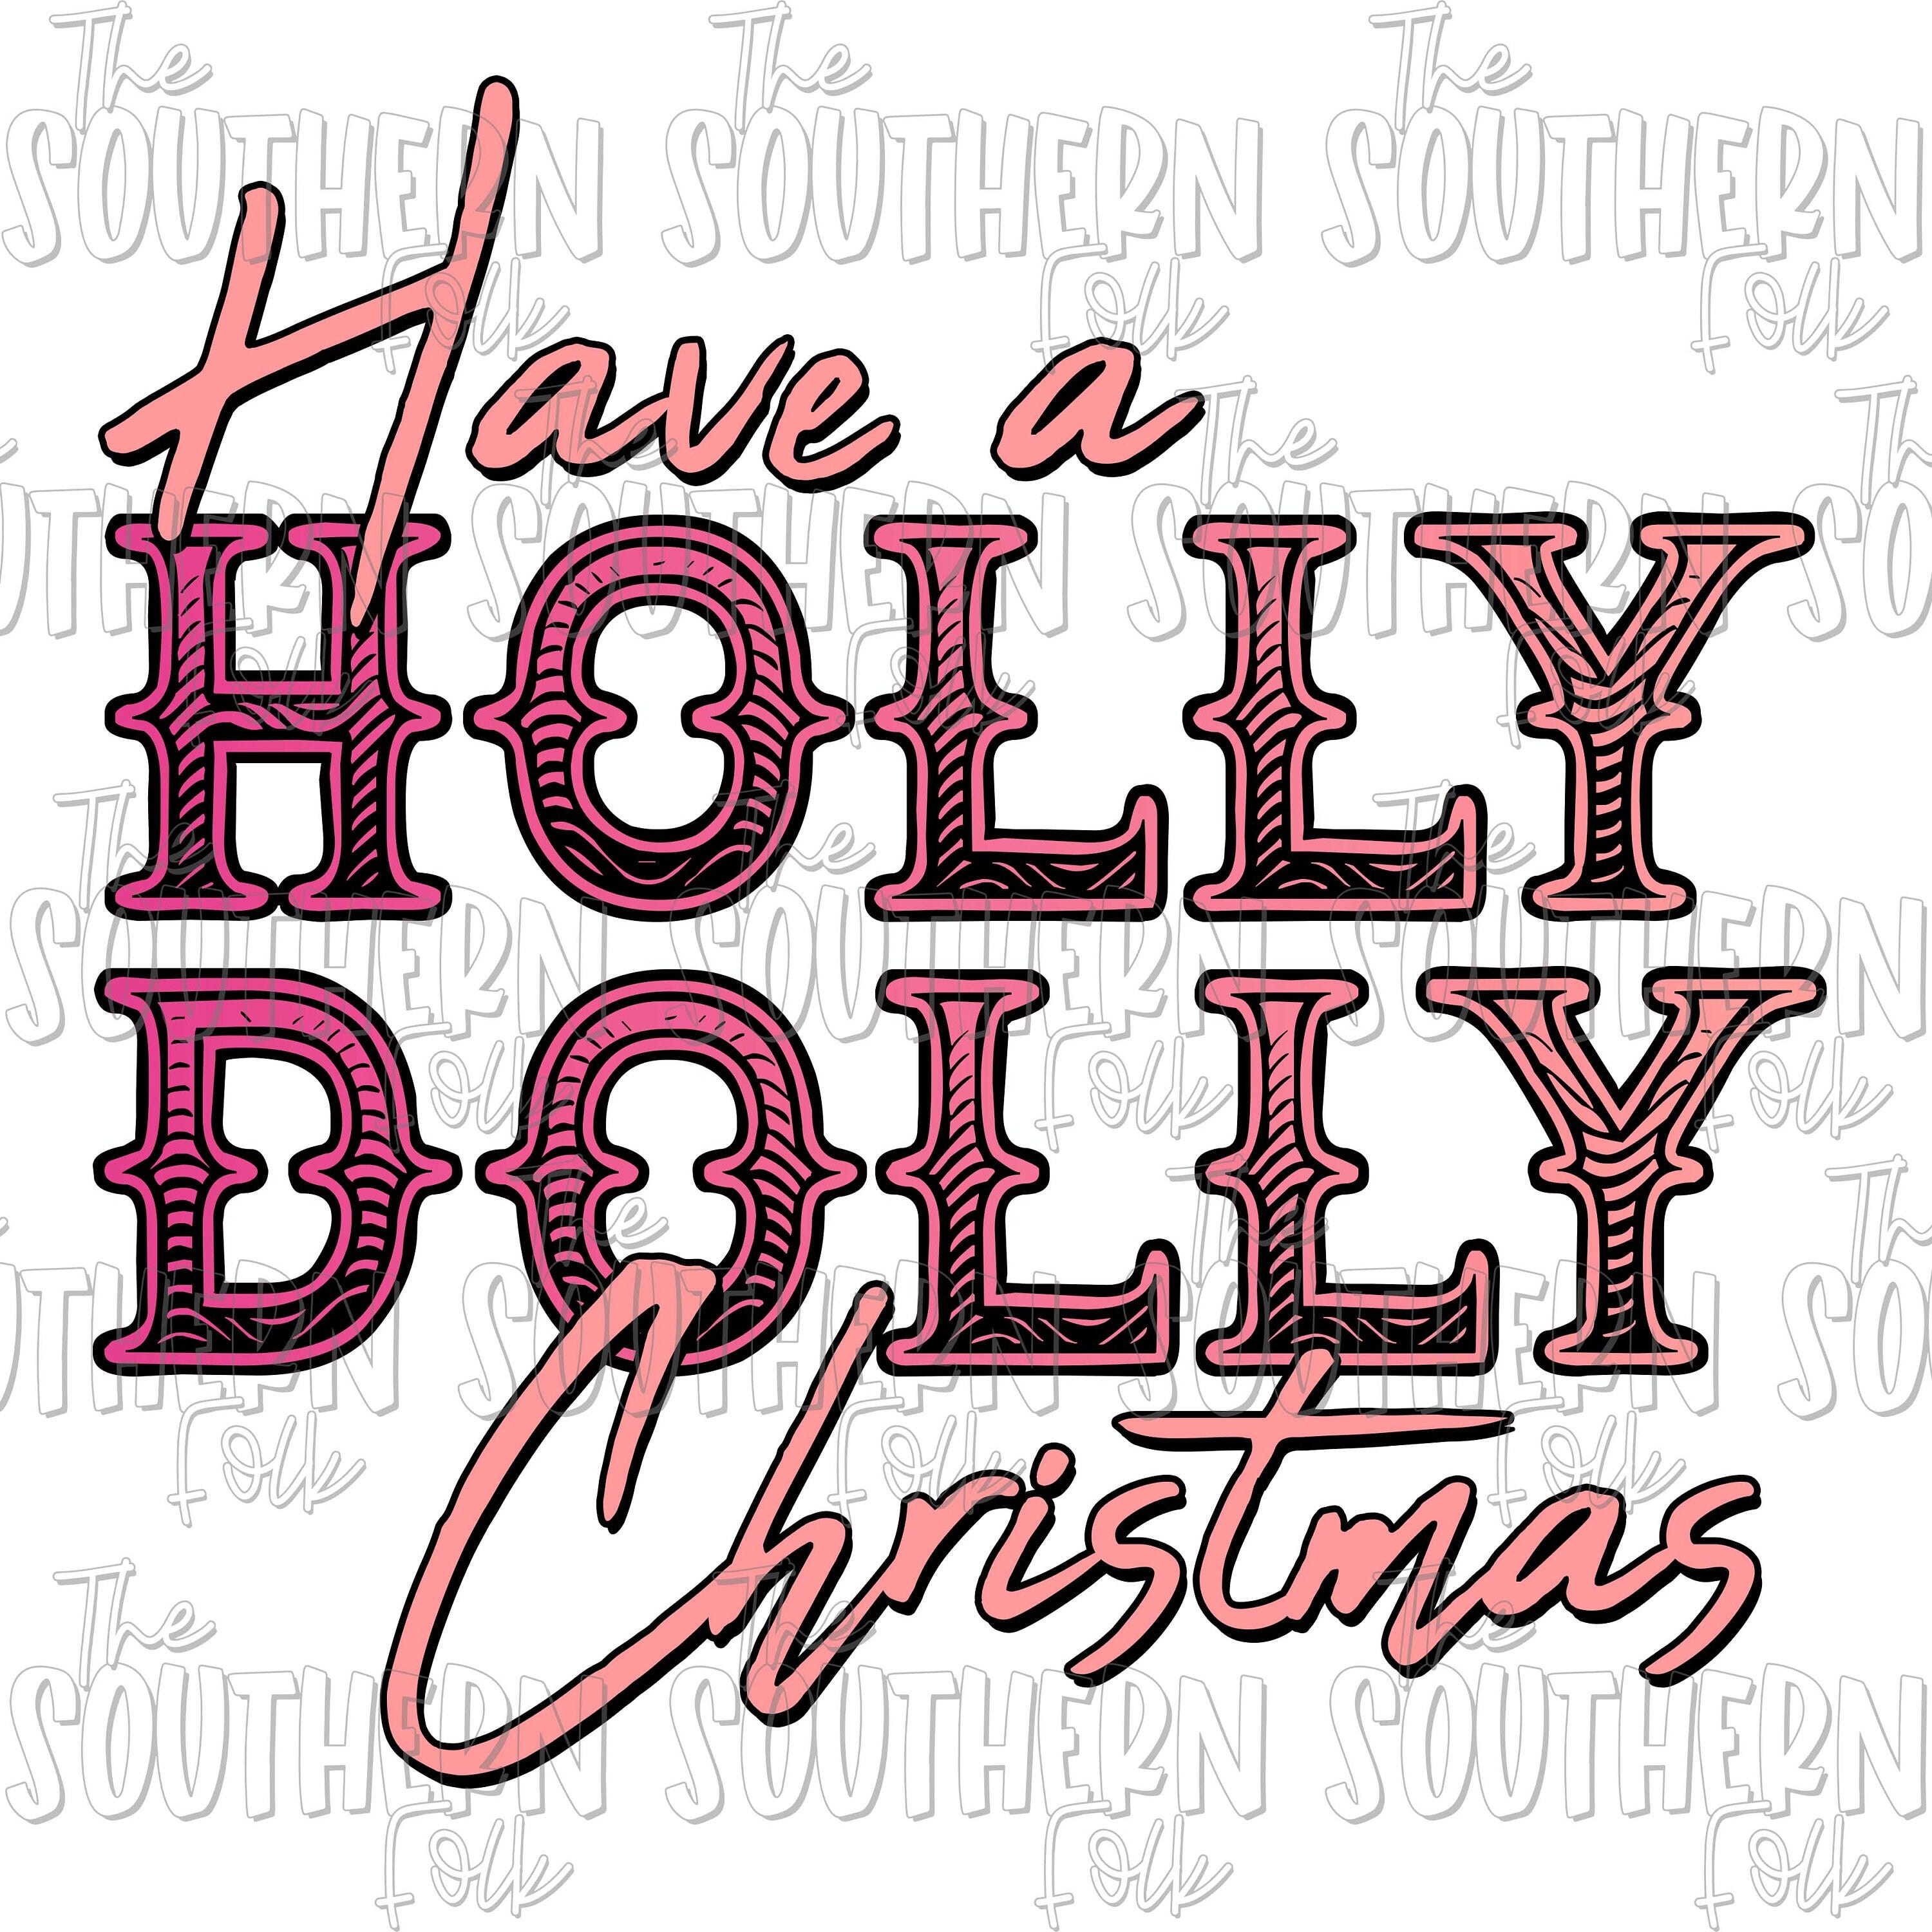 Holly Dolly Christmas Sublimation Design, PNG File, Digital Download, Sublimation Designs Downloads, Sublimation Designs, Country Music